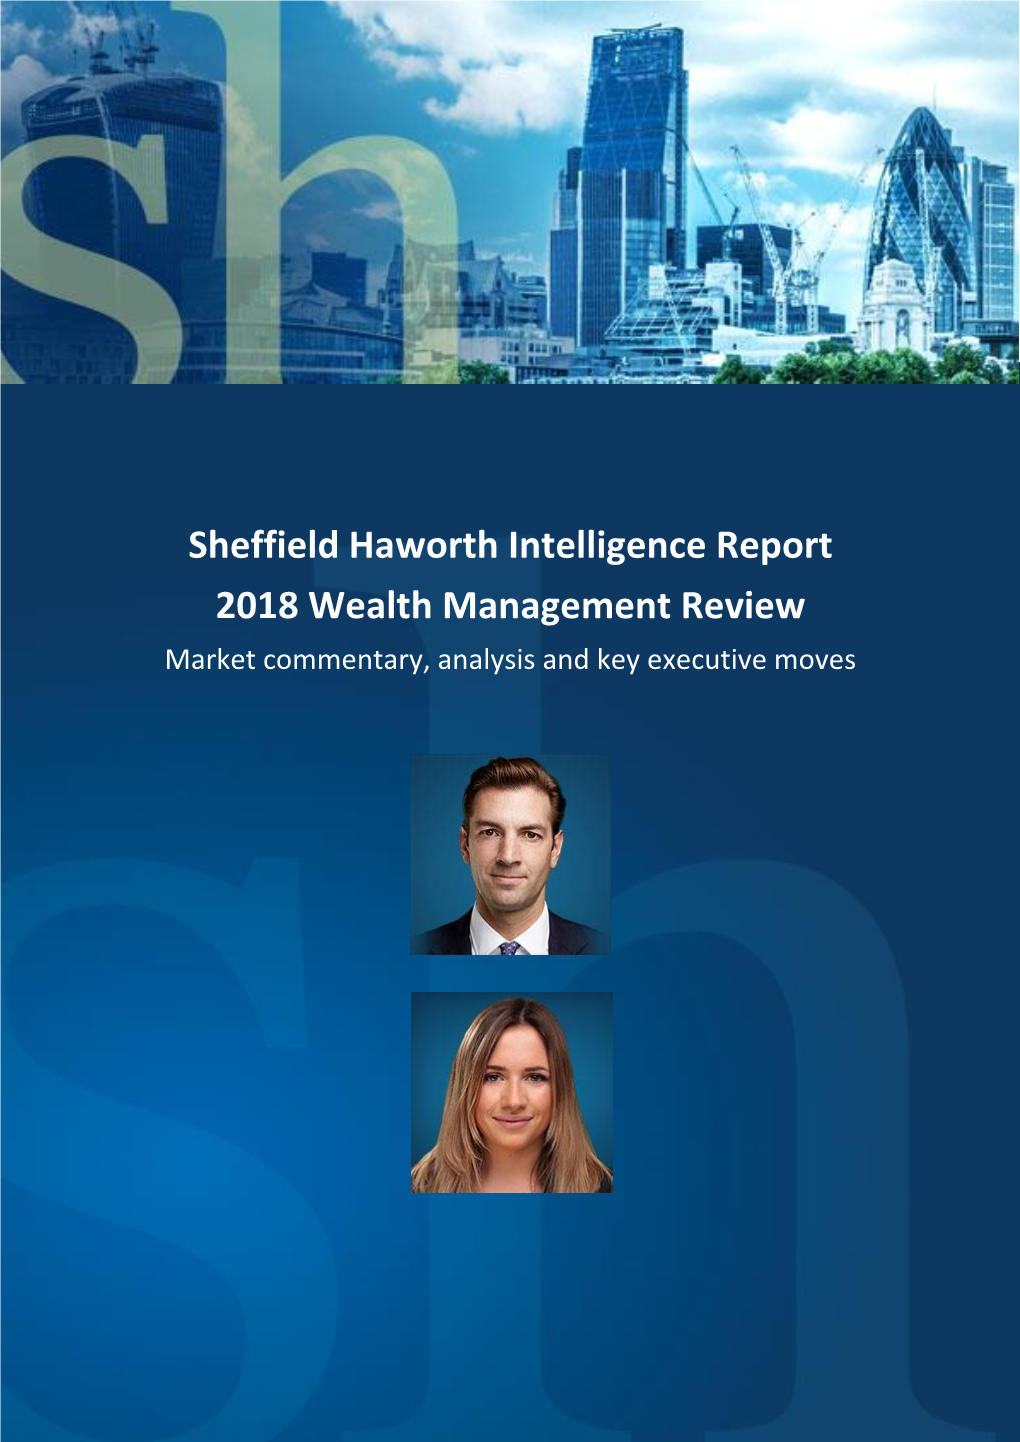 Sheffield Haworth Intelligence Report 2018 Wealth Management Review Market Commentary, Analysis and Key Executive Moves